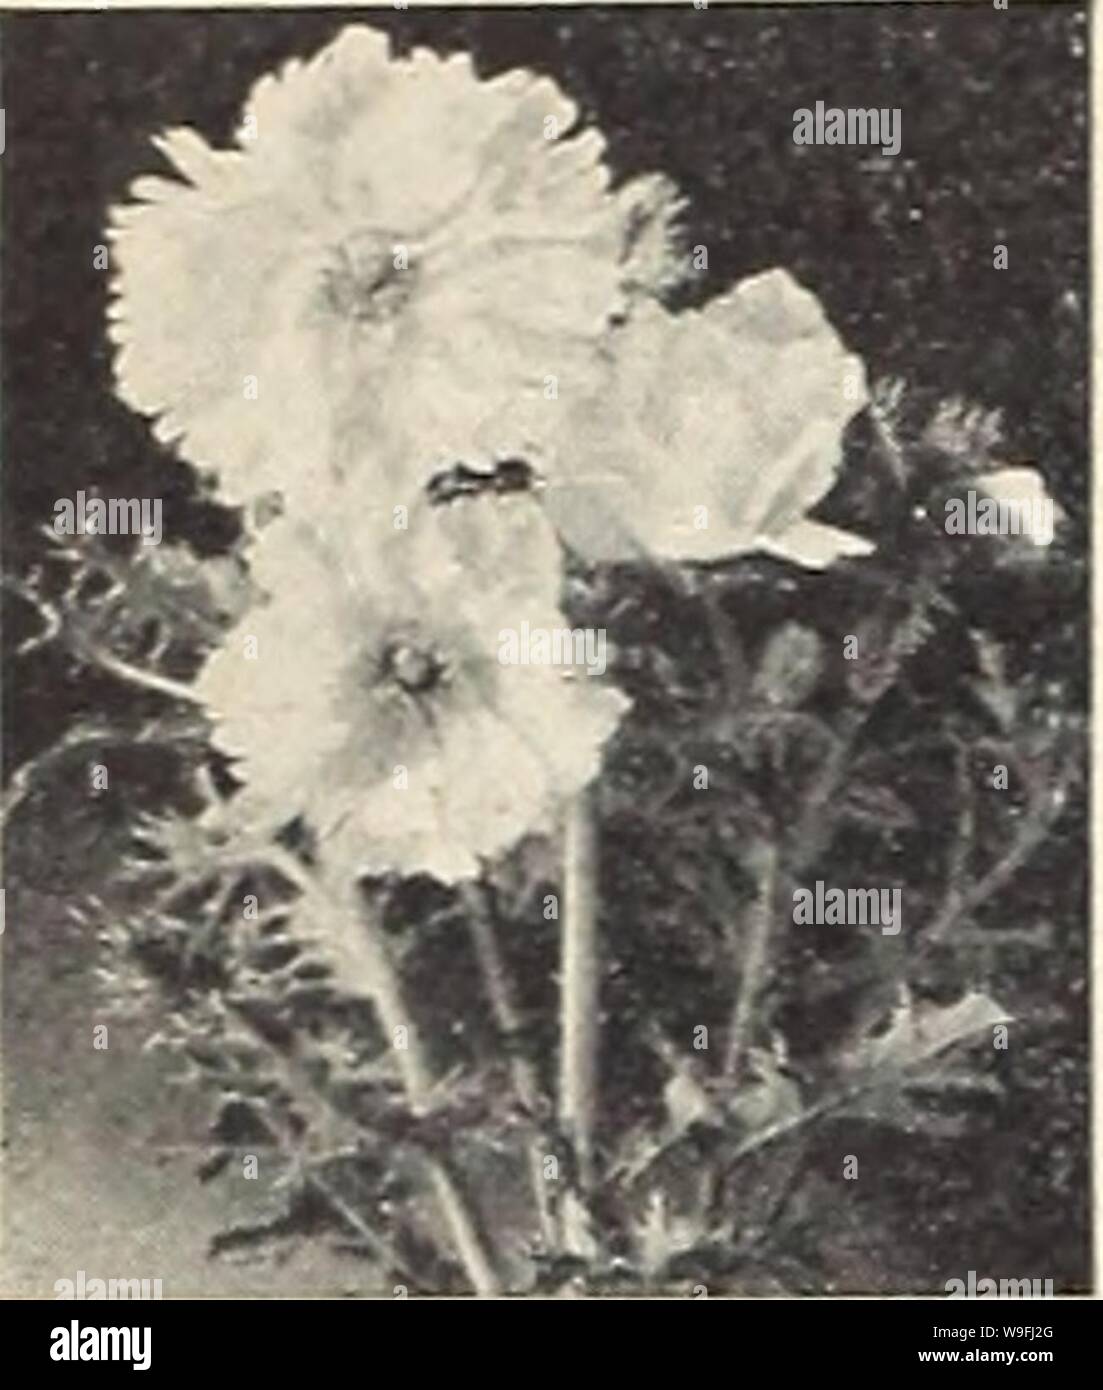 Archive image from page 45 of Currie's garden annual (1942). Currie's garden annual  curriesgardenann19curr 7 Year: 1942 ( Select Jlut a/ OillL FLOHER SEEDS = THE BEST THAT UP-TO-DATE METHODS CAN PRODUCE =    Argemone ANNUAL ANCHUSA (Blue Bird) A new onnual Anchusa, which grows about 18' tall; is of compact habit ond bears its rich indigo flowers at the top of the plant. Vi oz., 30e; Pkt., 10c. Stock Photo